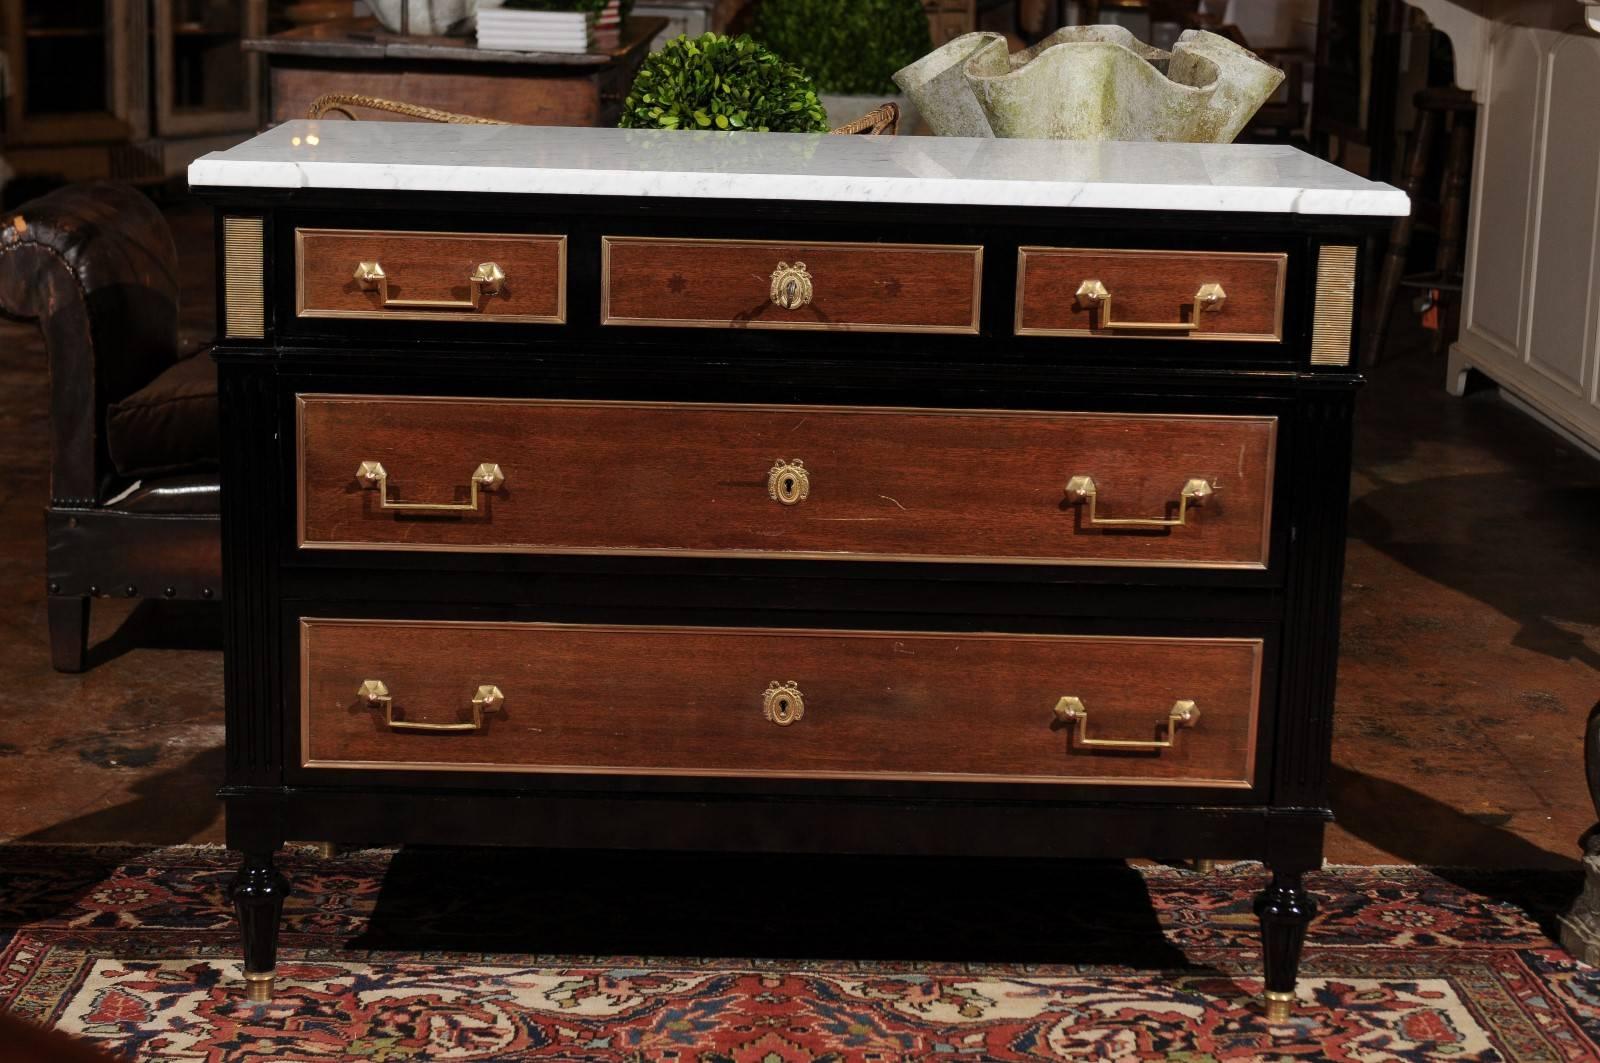 A French Directoire style marble top, ebonized wood with brass accents three-drawer commode from the early 20th century. This exquisite French chest features a white variegated marble top sitting above a frieze drawer. This drawer is divided into